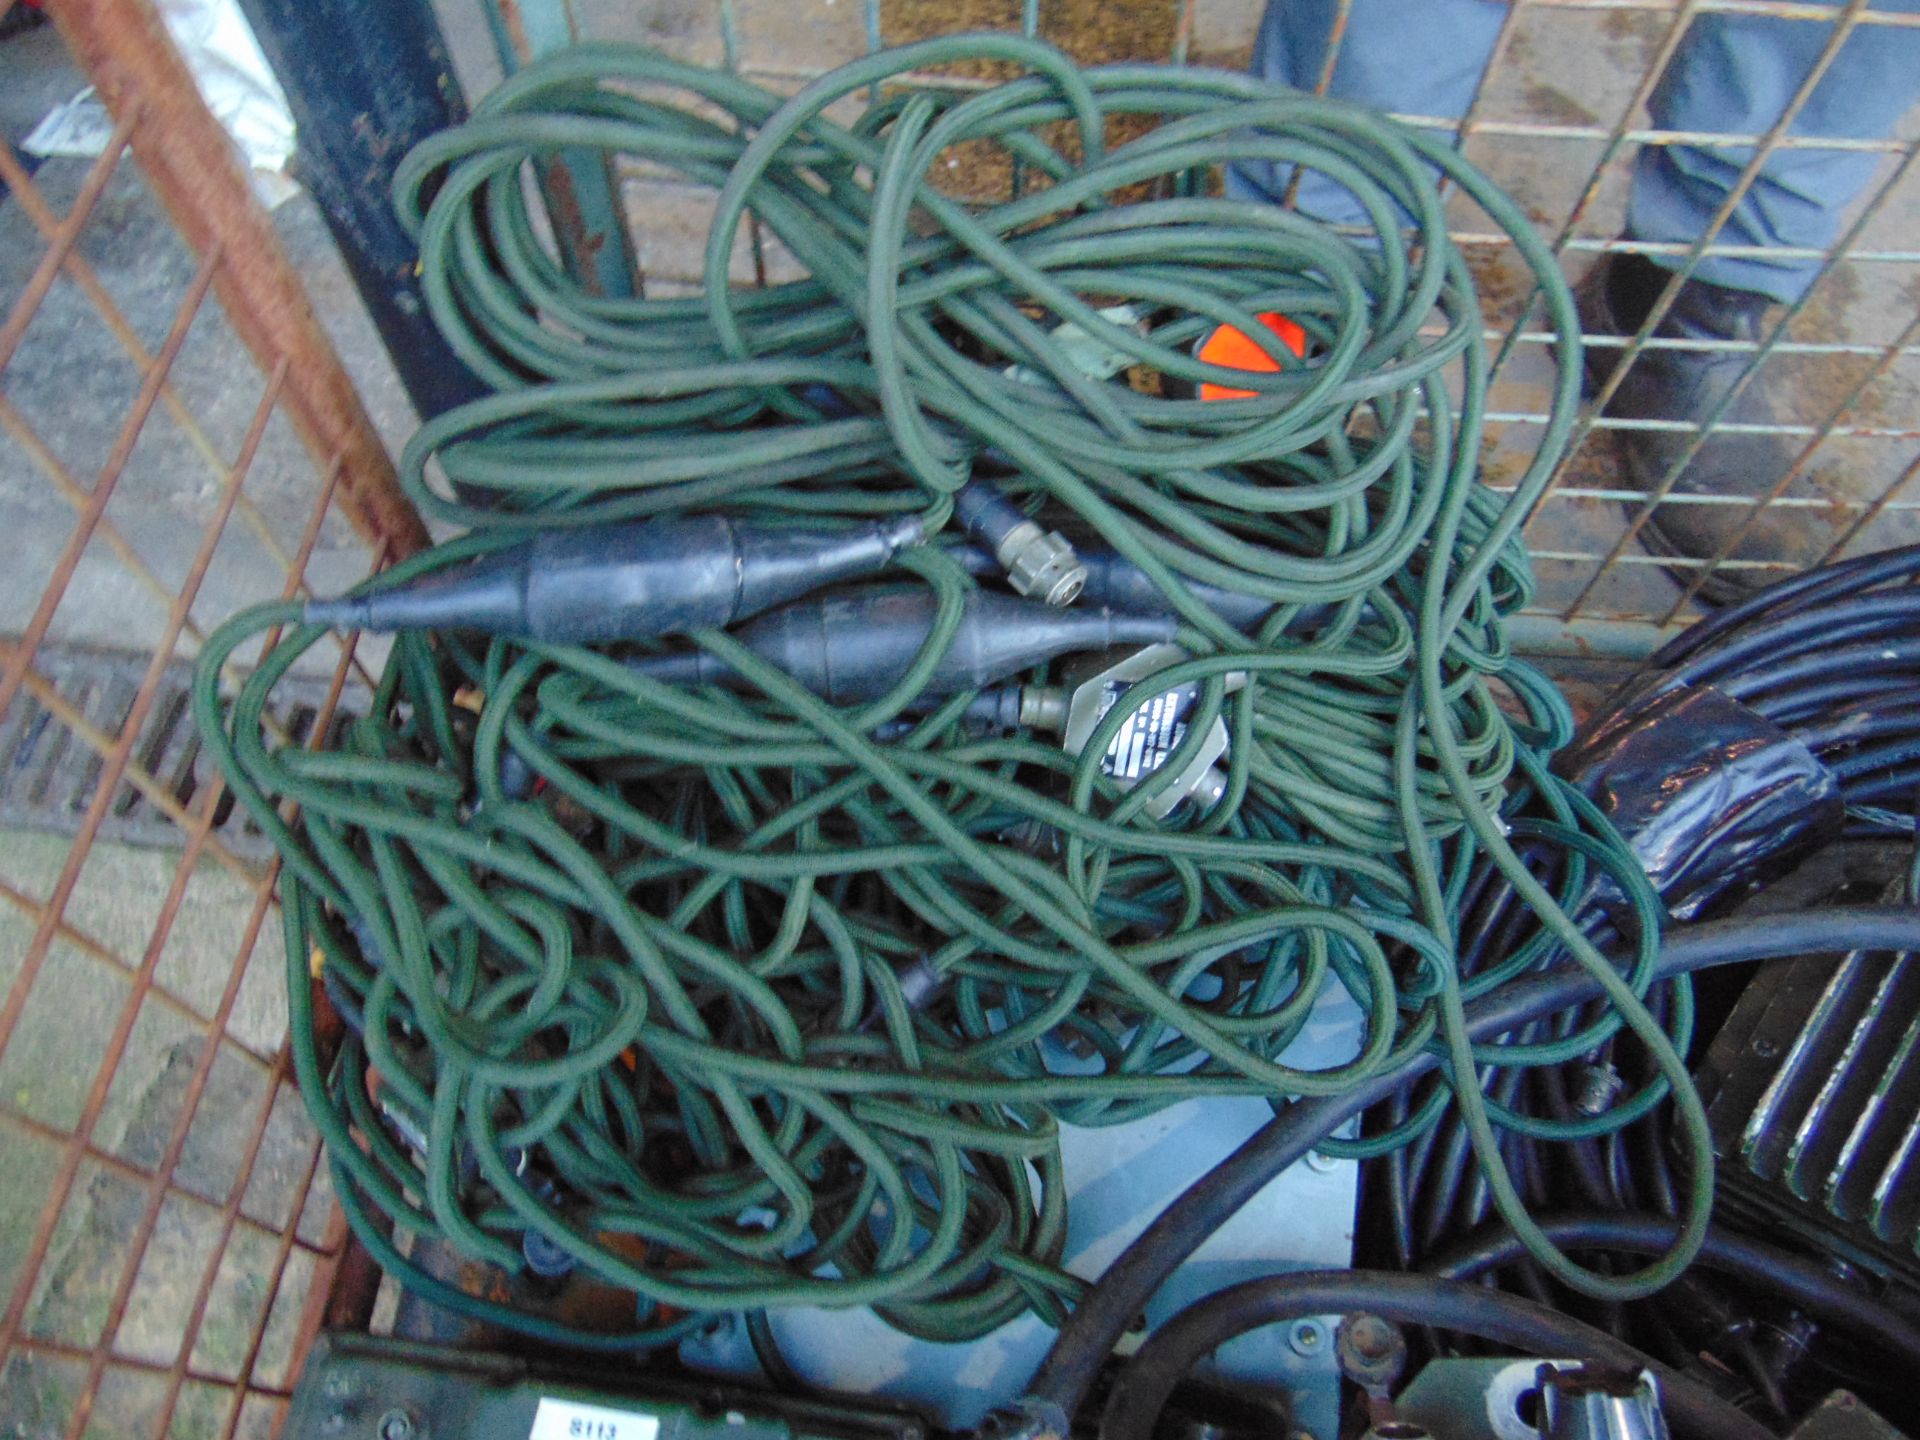 Stillage of Clansman Radio Equipment inc Headsets, Cable Antenna kits Ect - Image 5 of 7